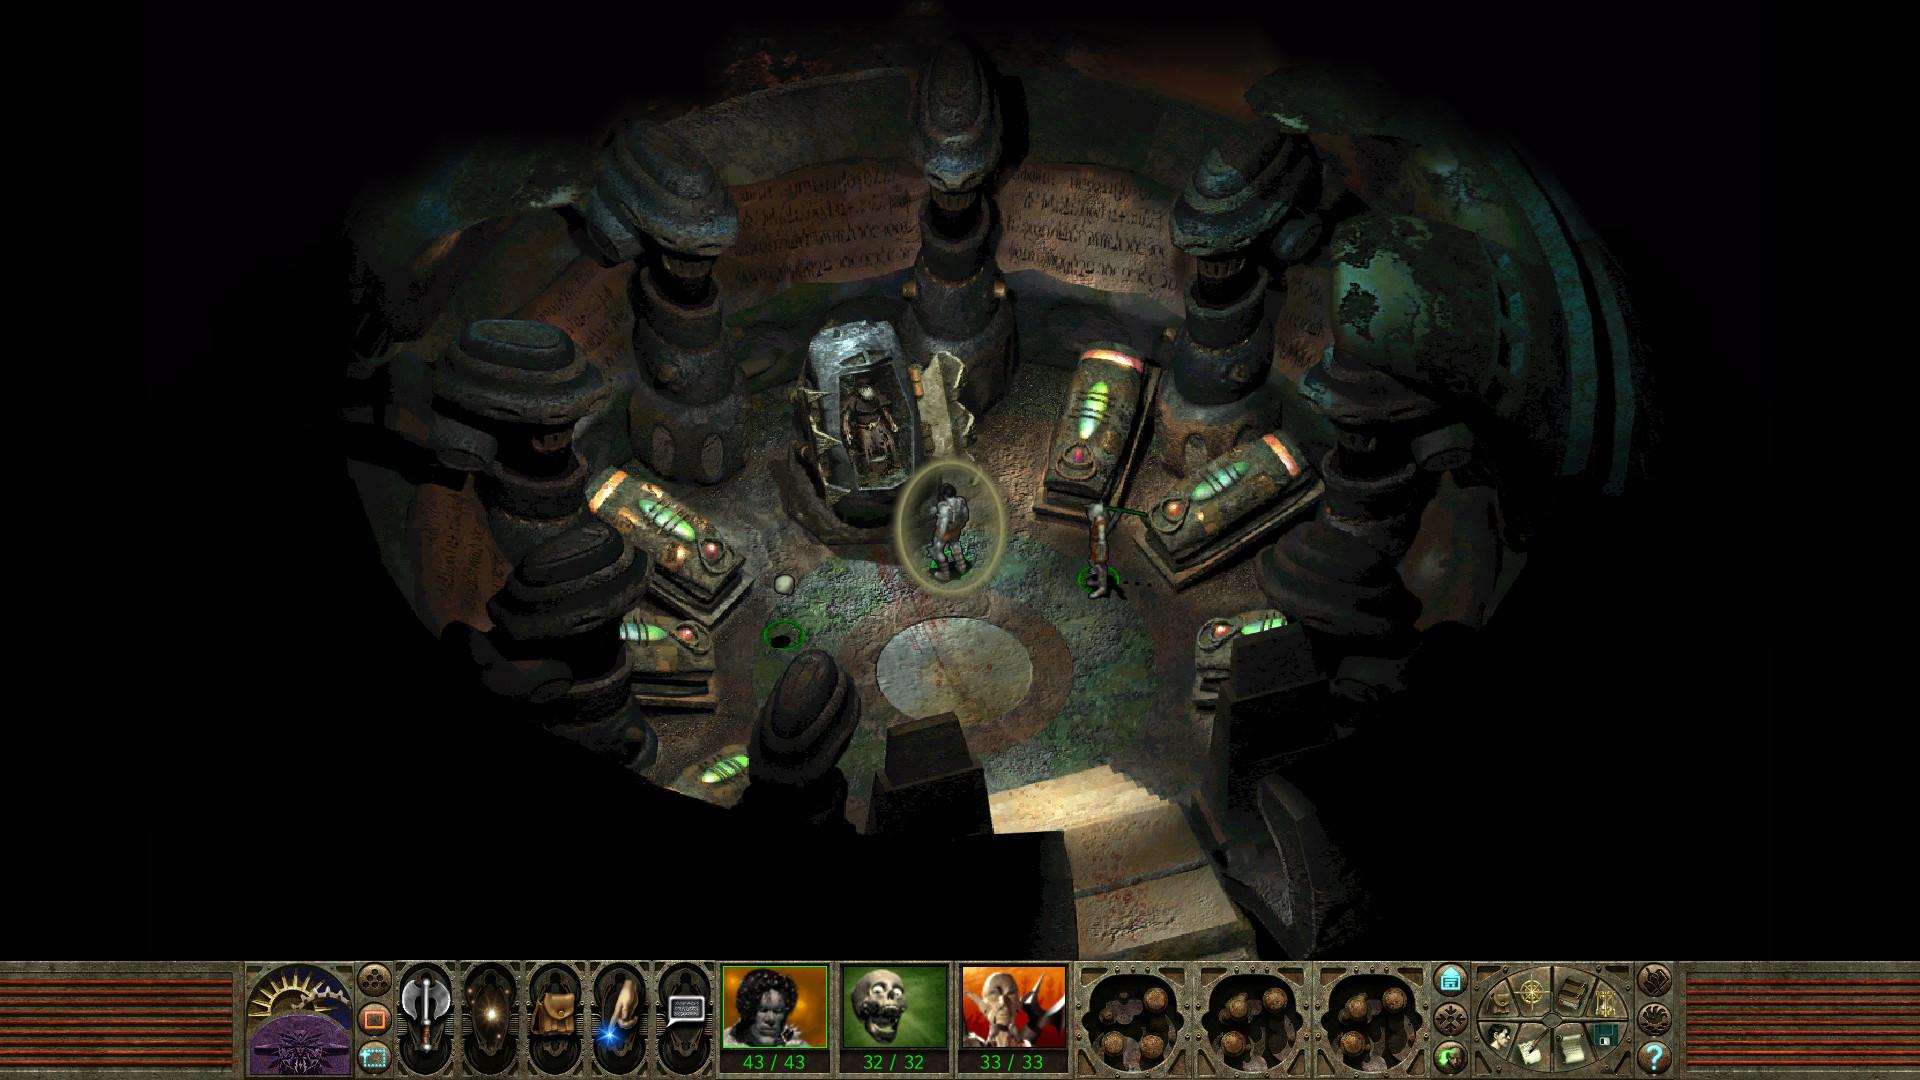 Screenshot №8 from game Planescape: Torment: Enhanced Edition